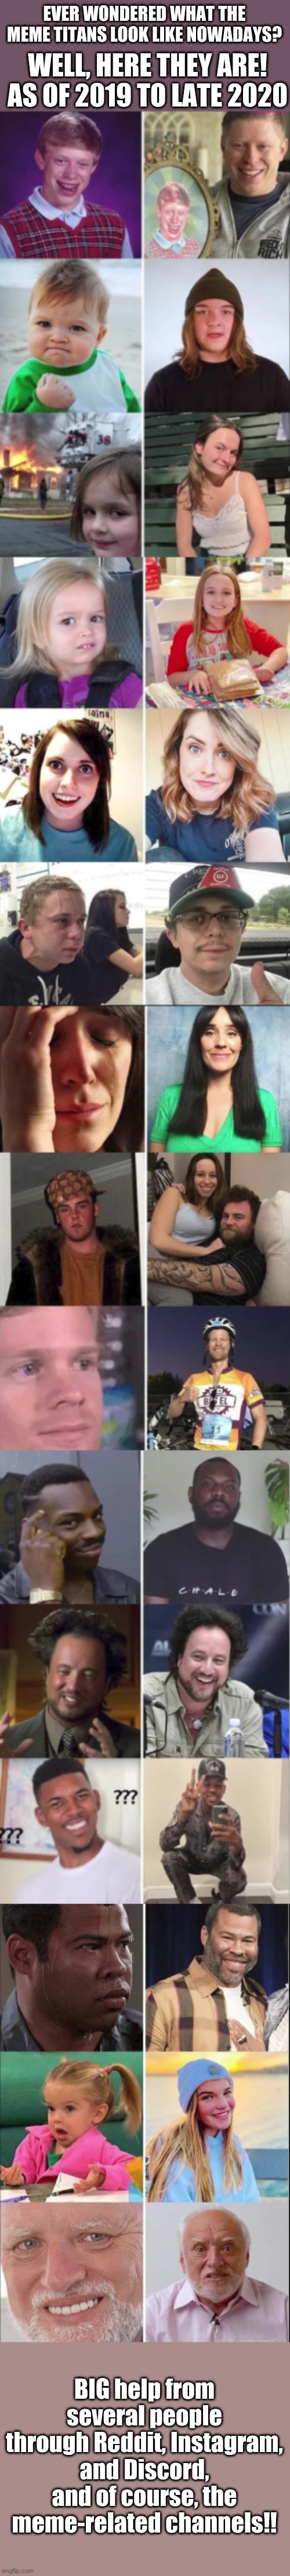 Of course, I did not make this myself. I found some of these photos myself but a lot came from a lot of other people and sources | EVER WONDERED WHAT THE MEME TITANS LOOK LIKE NOWADAYS? WELL, HERE THEY ARE! AS OF 2019 TO LATE 2020; BIG help from several people through Reddit, Instagram, and Discord, and of course, the meme-related channels!! | image tagged in memes,old memes,nostalgia | made w/ Imgflip meme maker